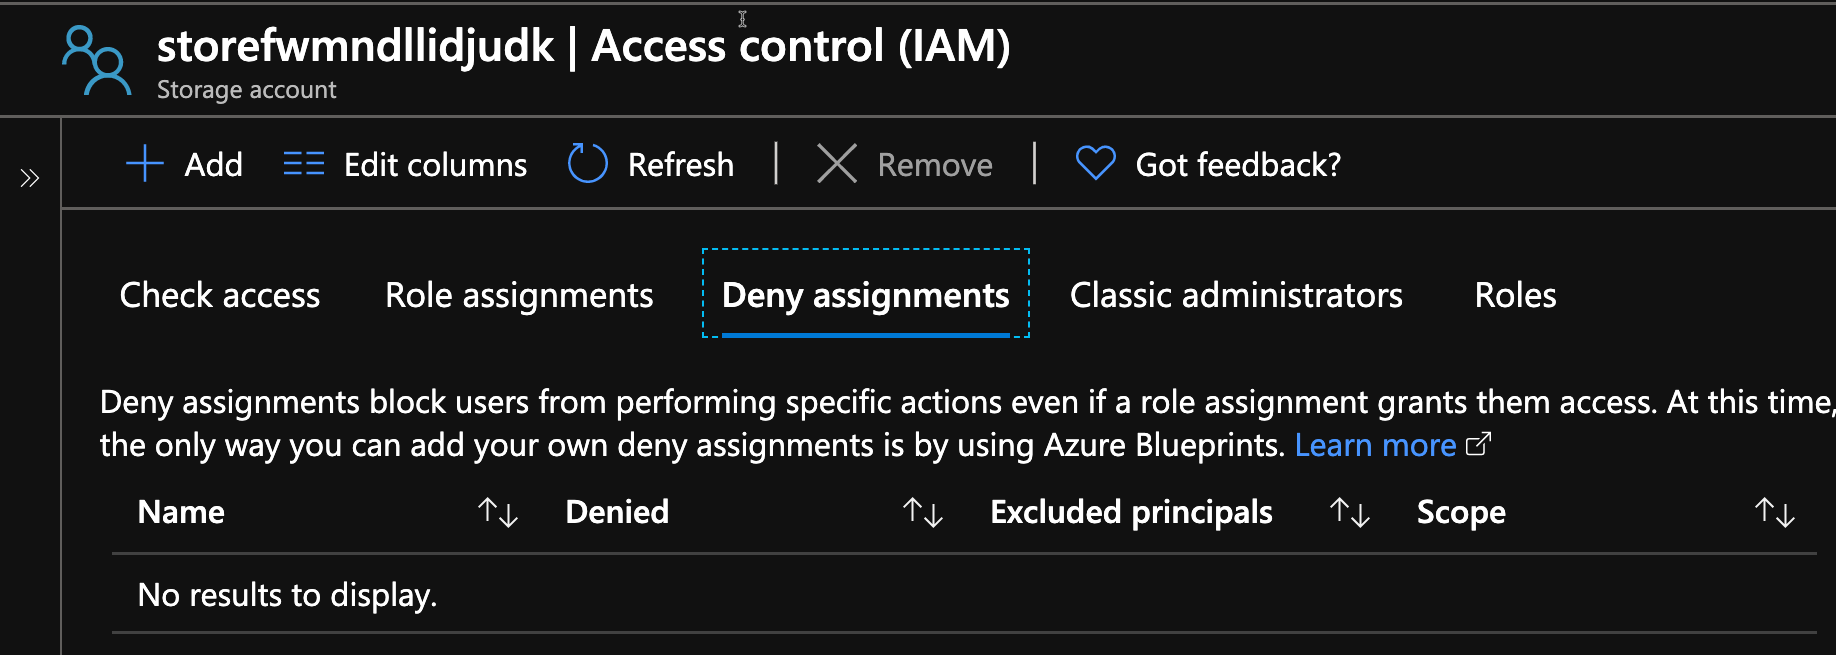 Click on Deny assignments